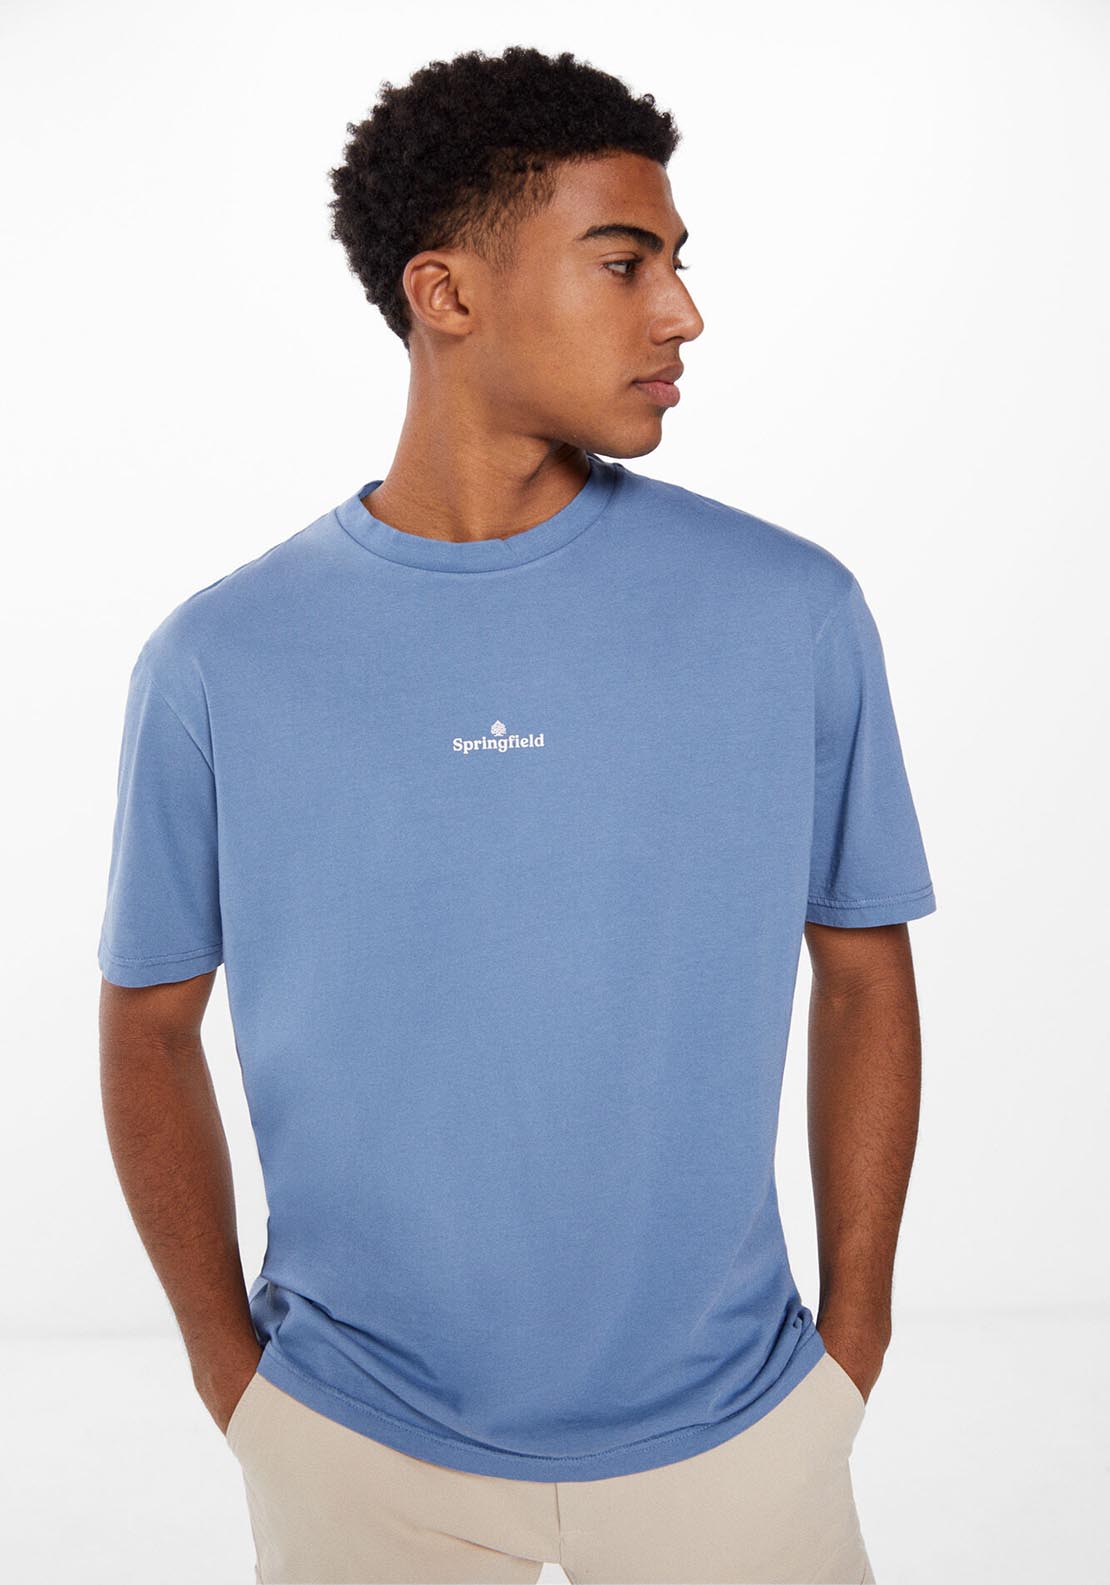 Springfield Washed T-shirt with logo - Blue 4 Shaws Department Stores